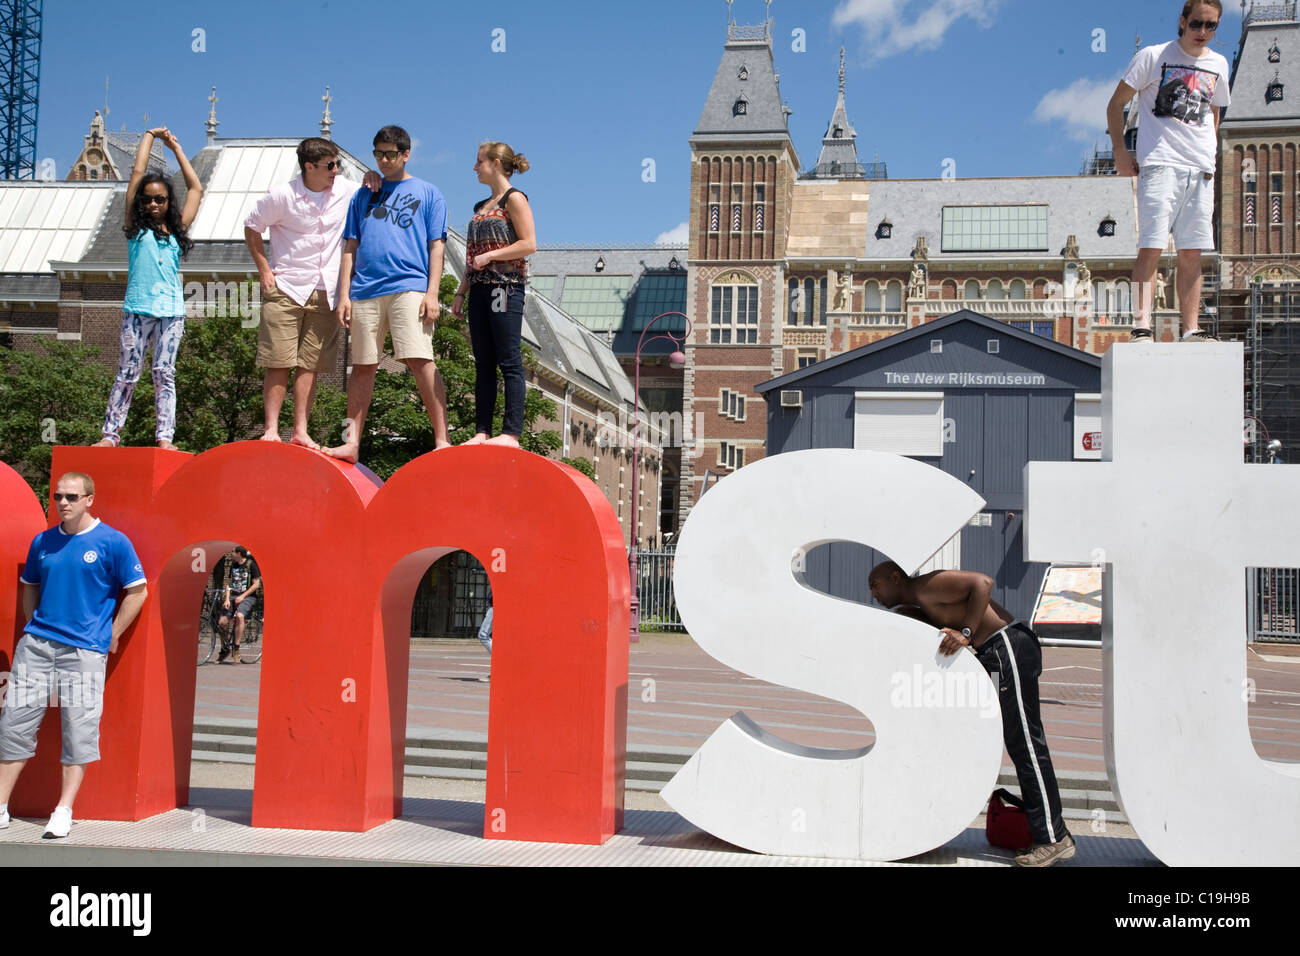 People climbing on large alphabetical sculpture. New Rijksmuseum building in Museum Square. Amsterdam. Netherlands. Stock Photo